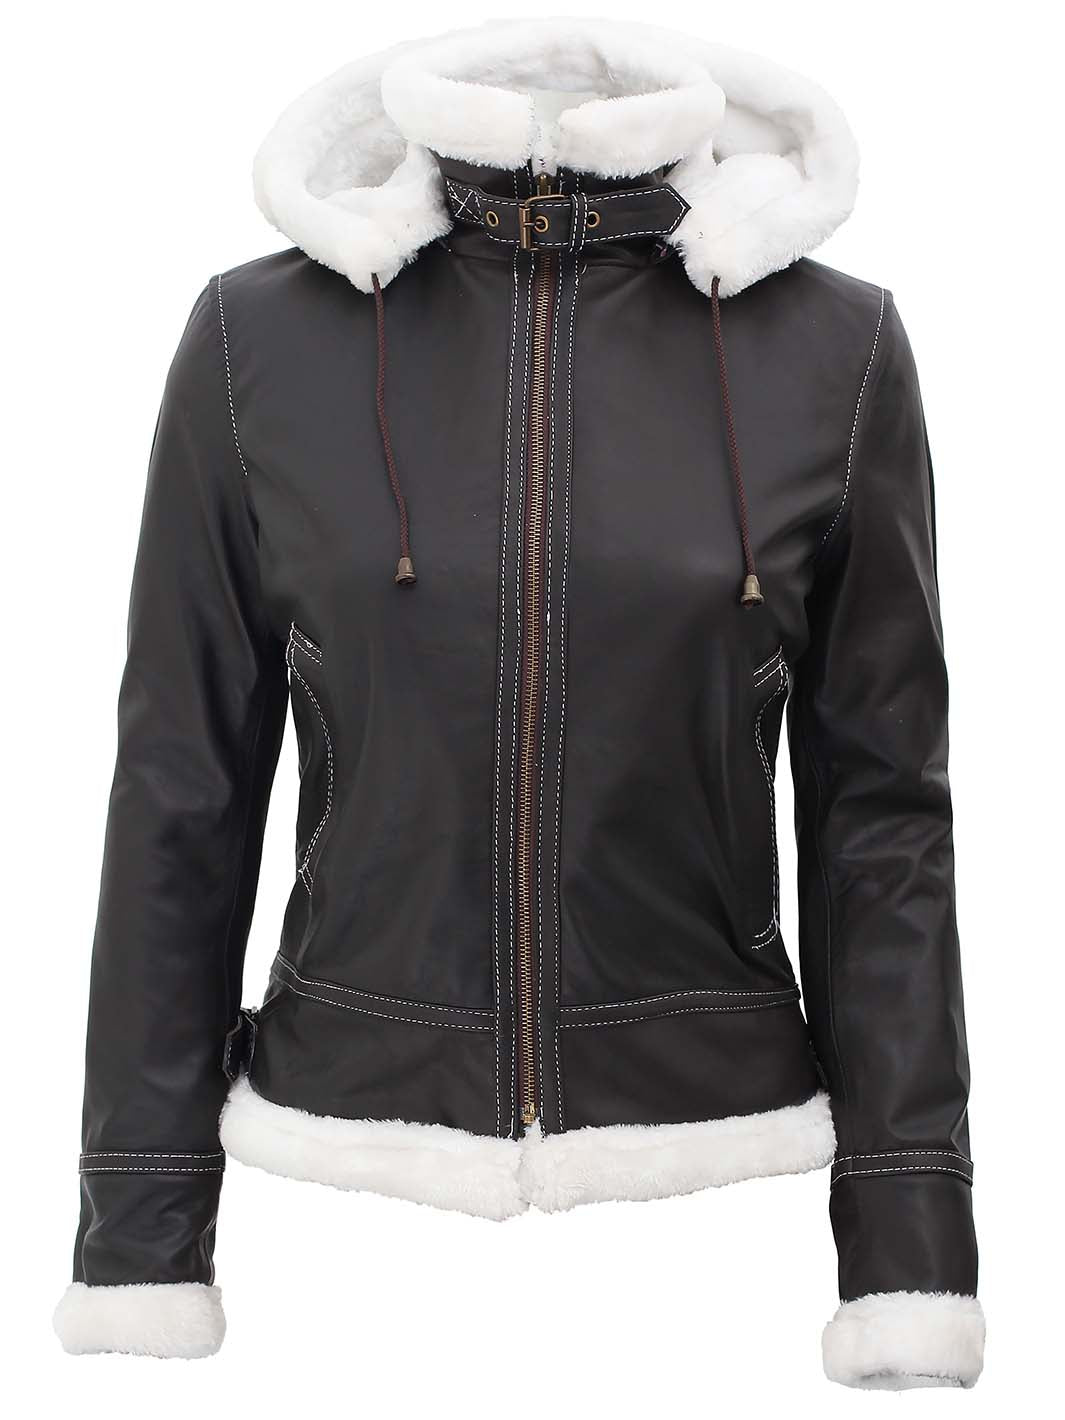 Mary Brown Women Shearling Leather Jacket